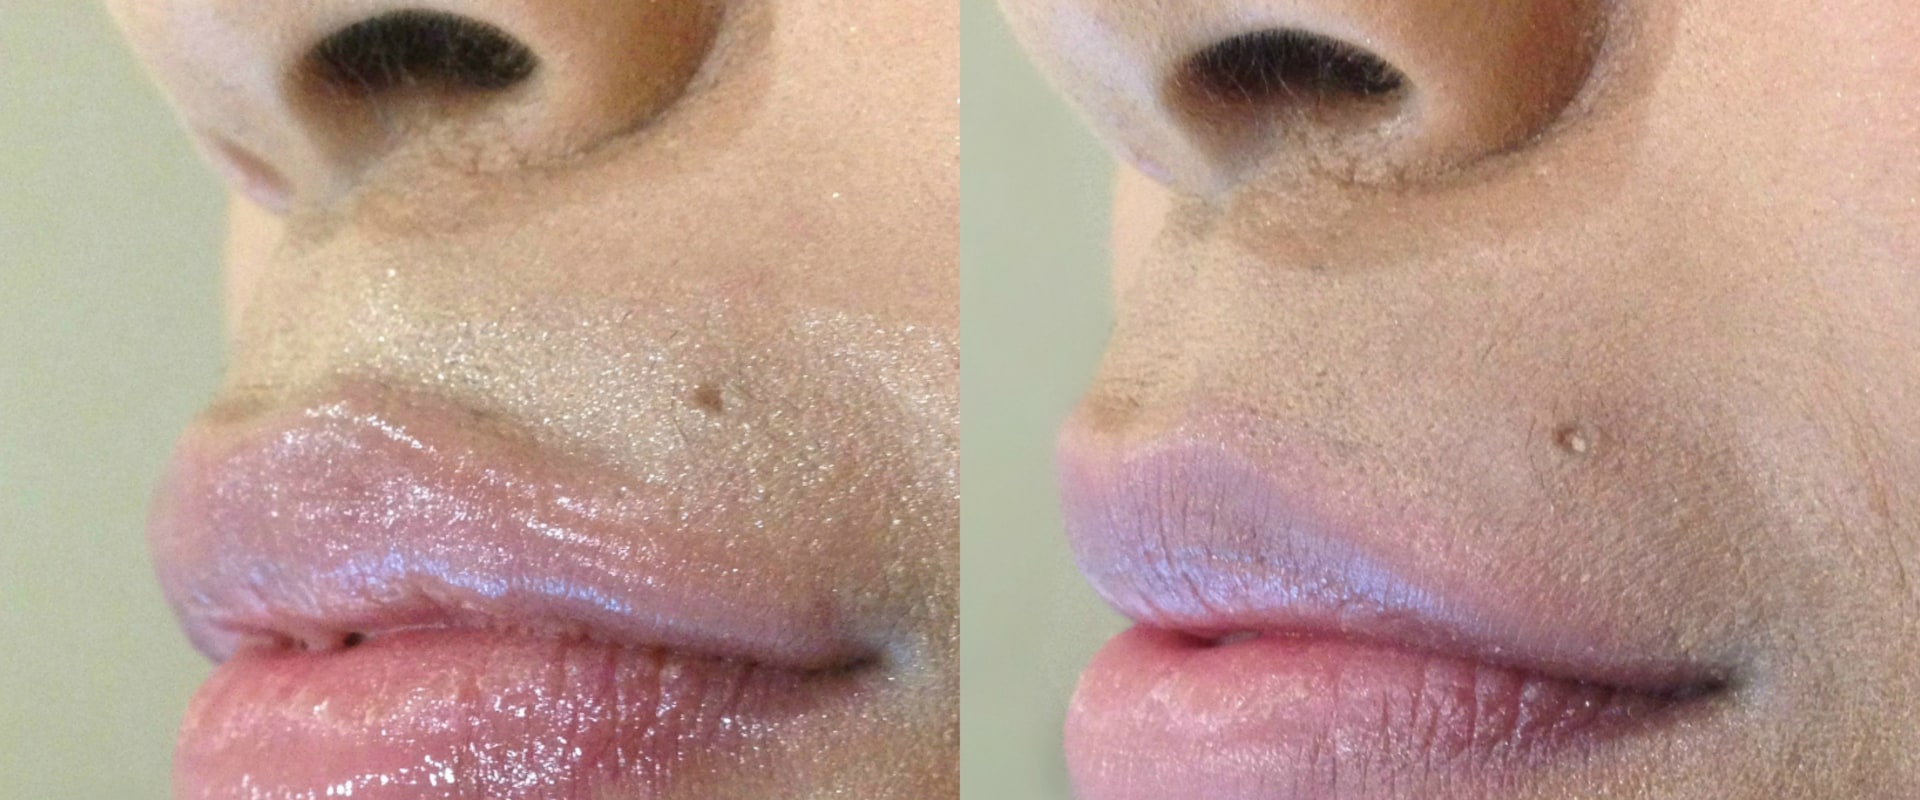 How much does a syringe of juvederm usually cost?